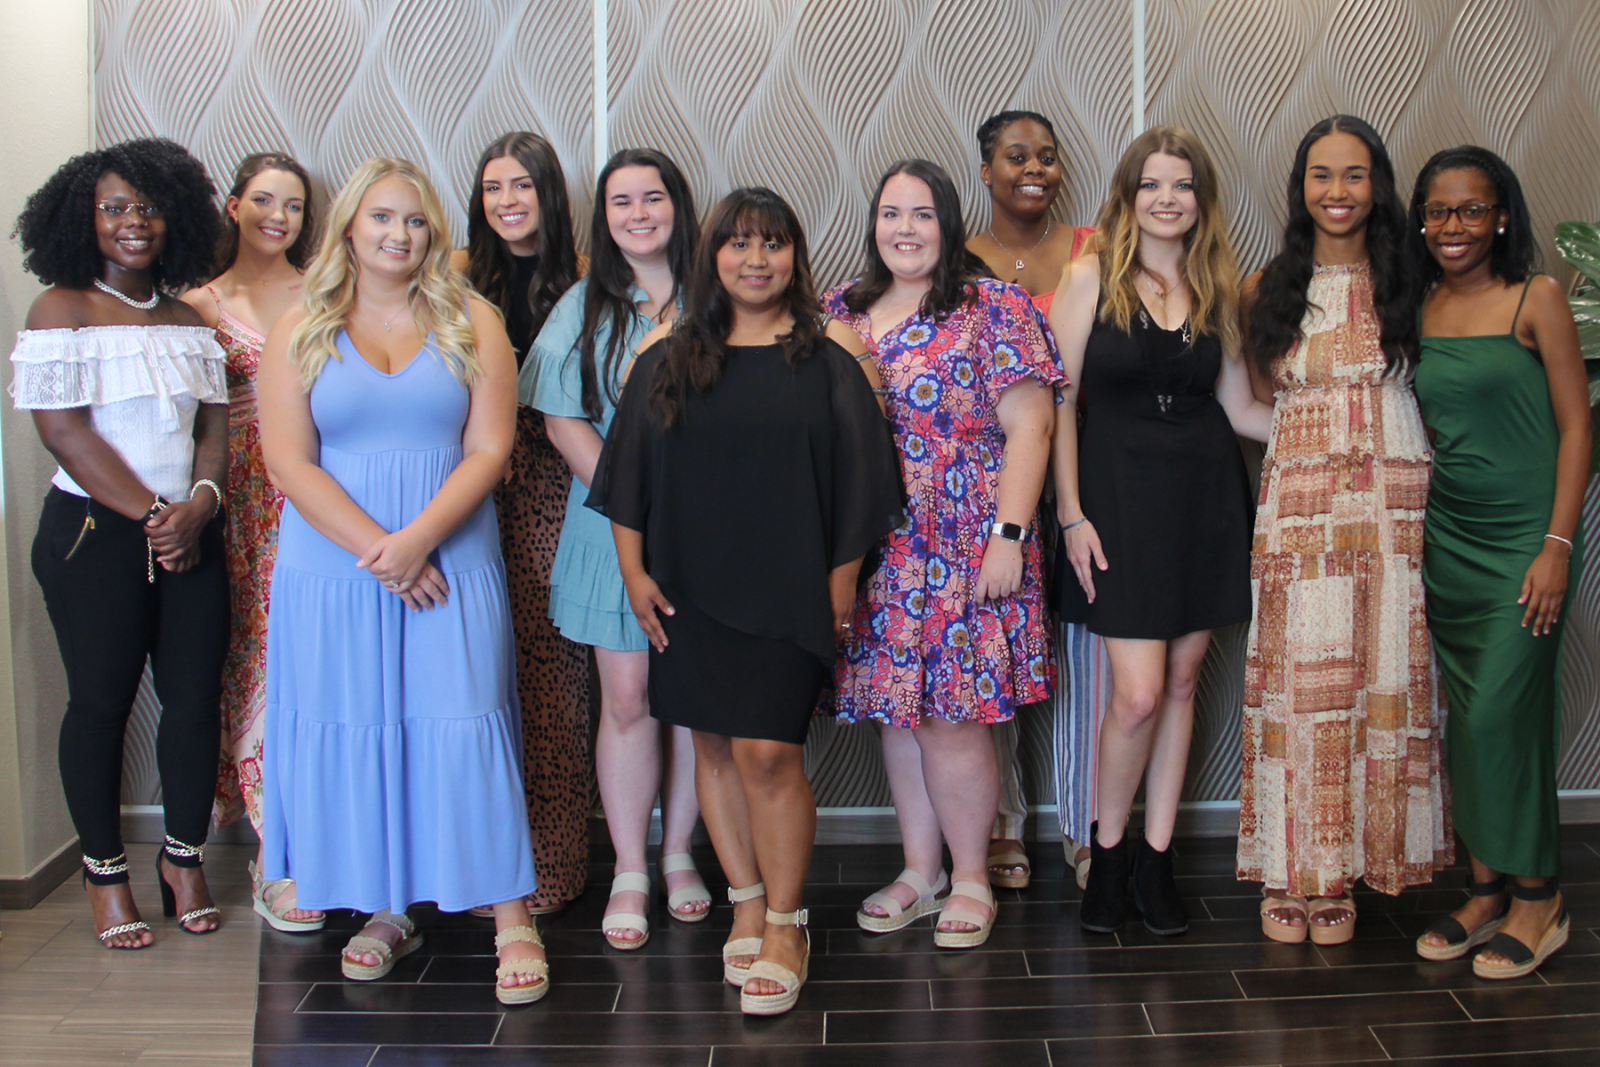 Ogeechee Technical College July 2023 Dental Assisting Pinning Ceremony Students Posing Together for a Group Photo